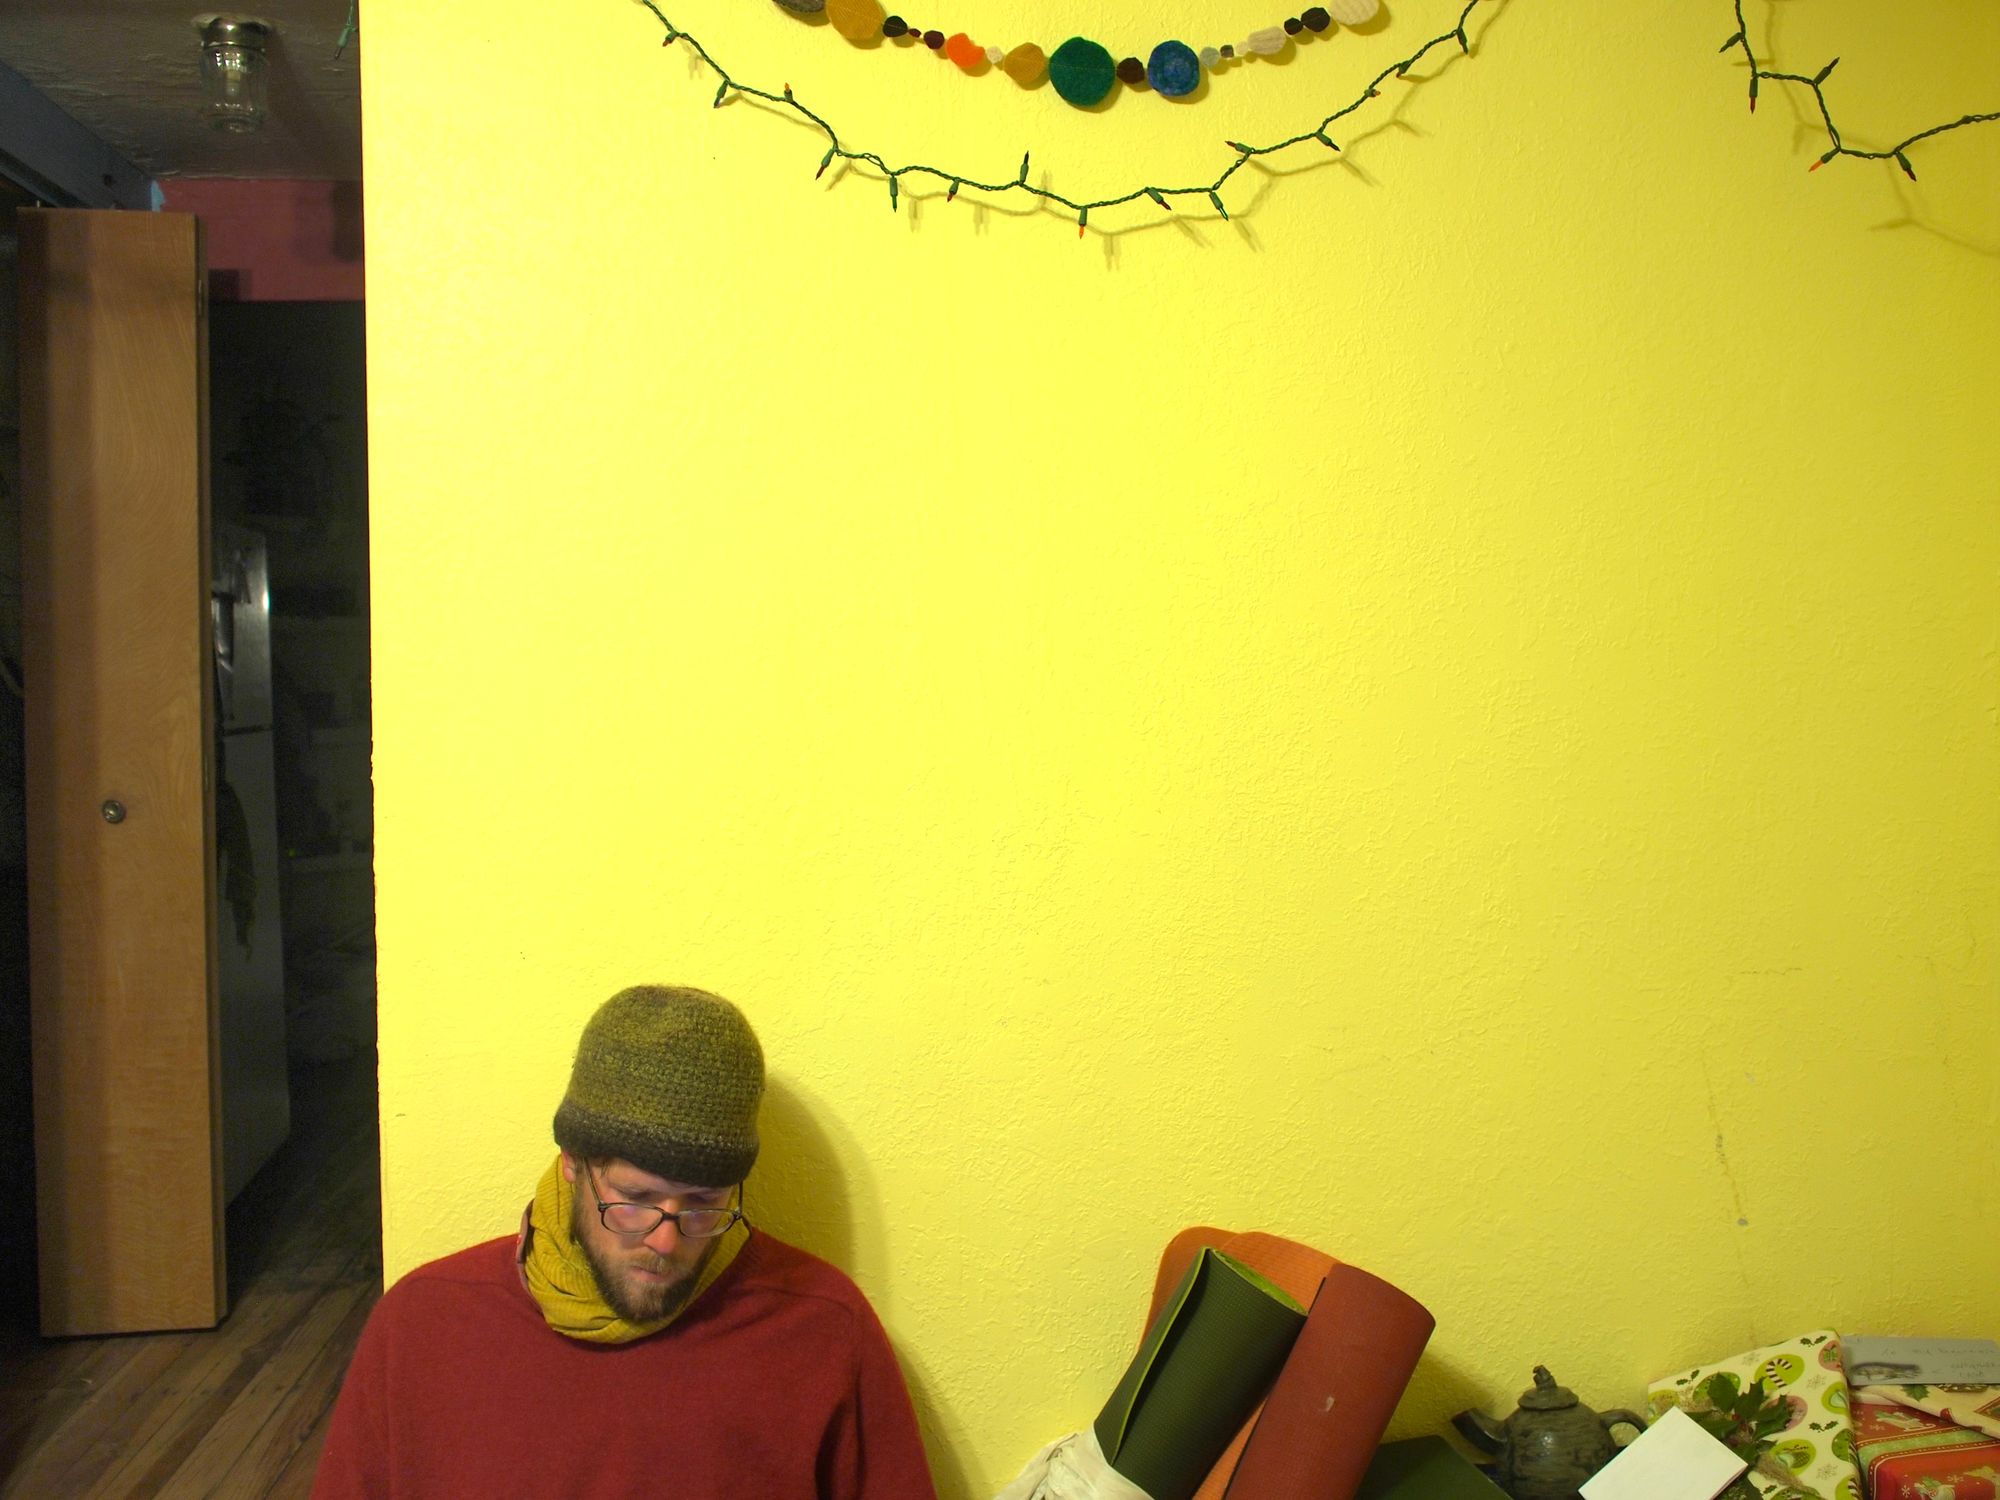 A yellow wall fills most of the picture while a man sitting on the floor looks down at his hands. 